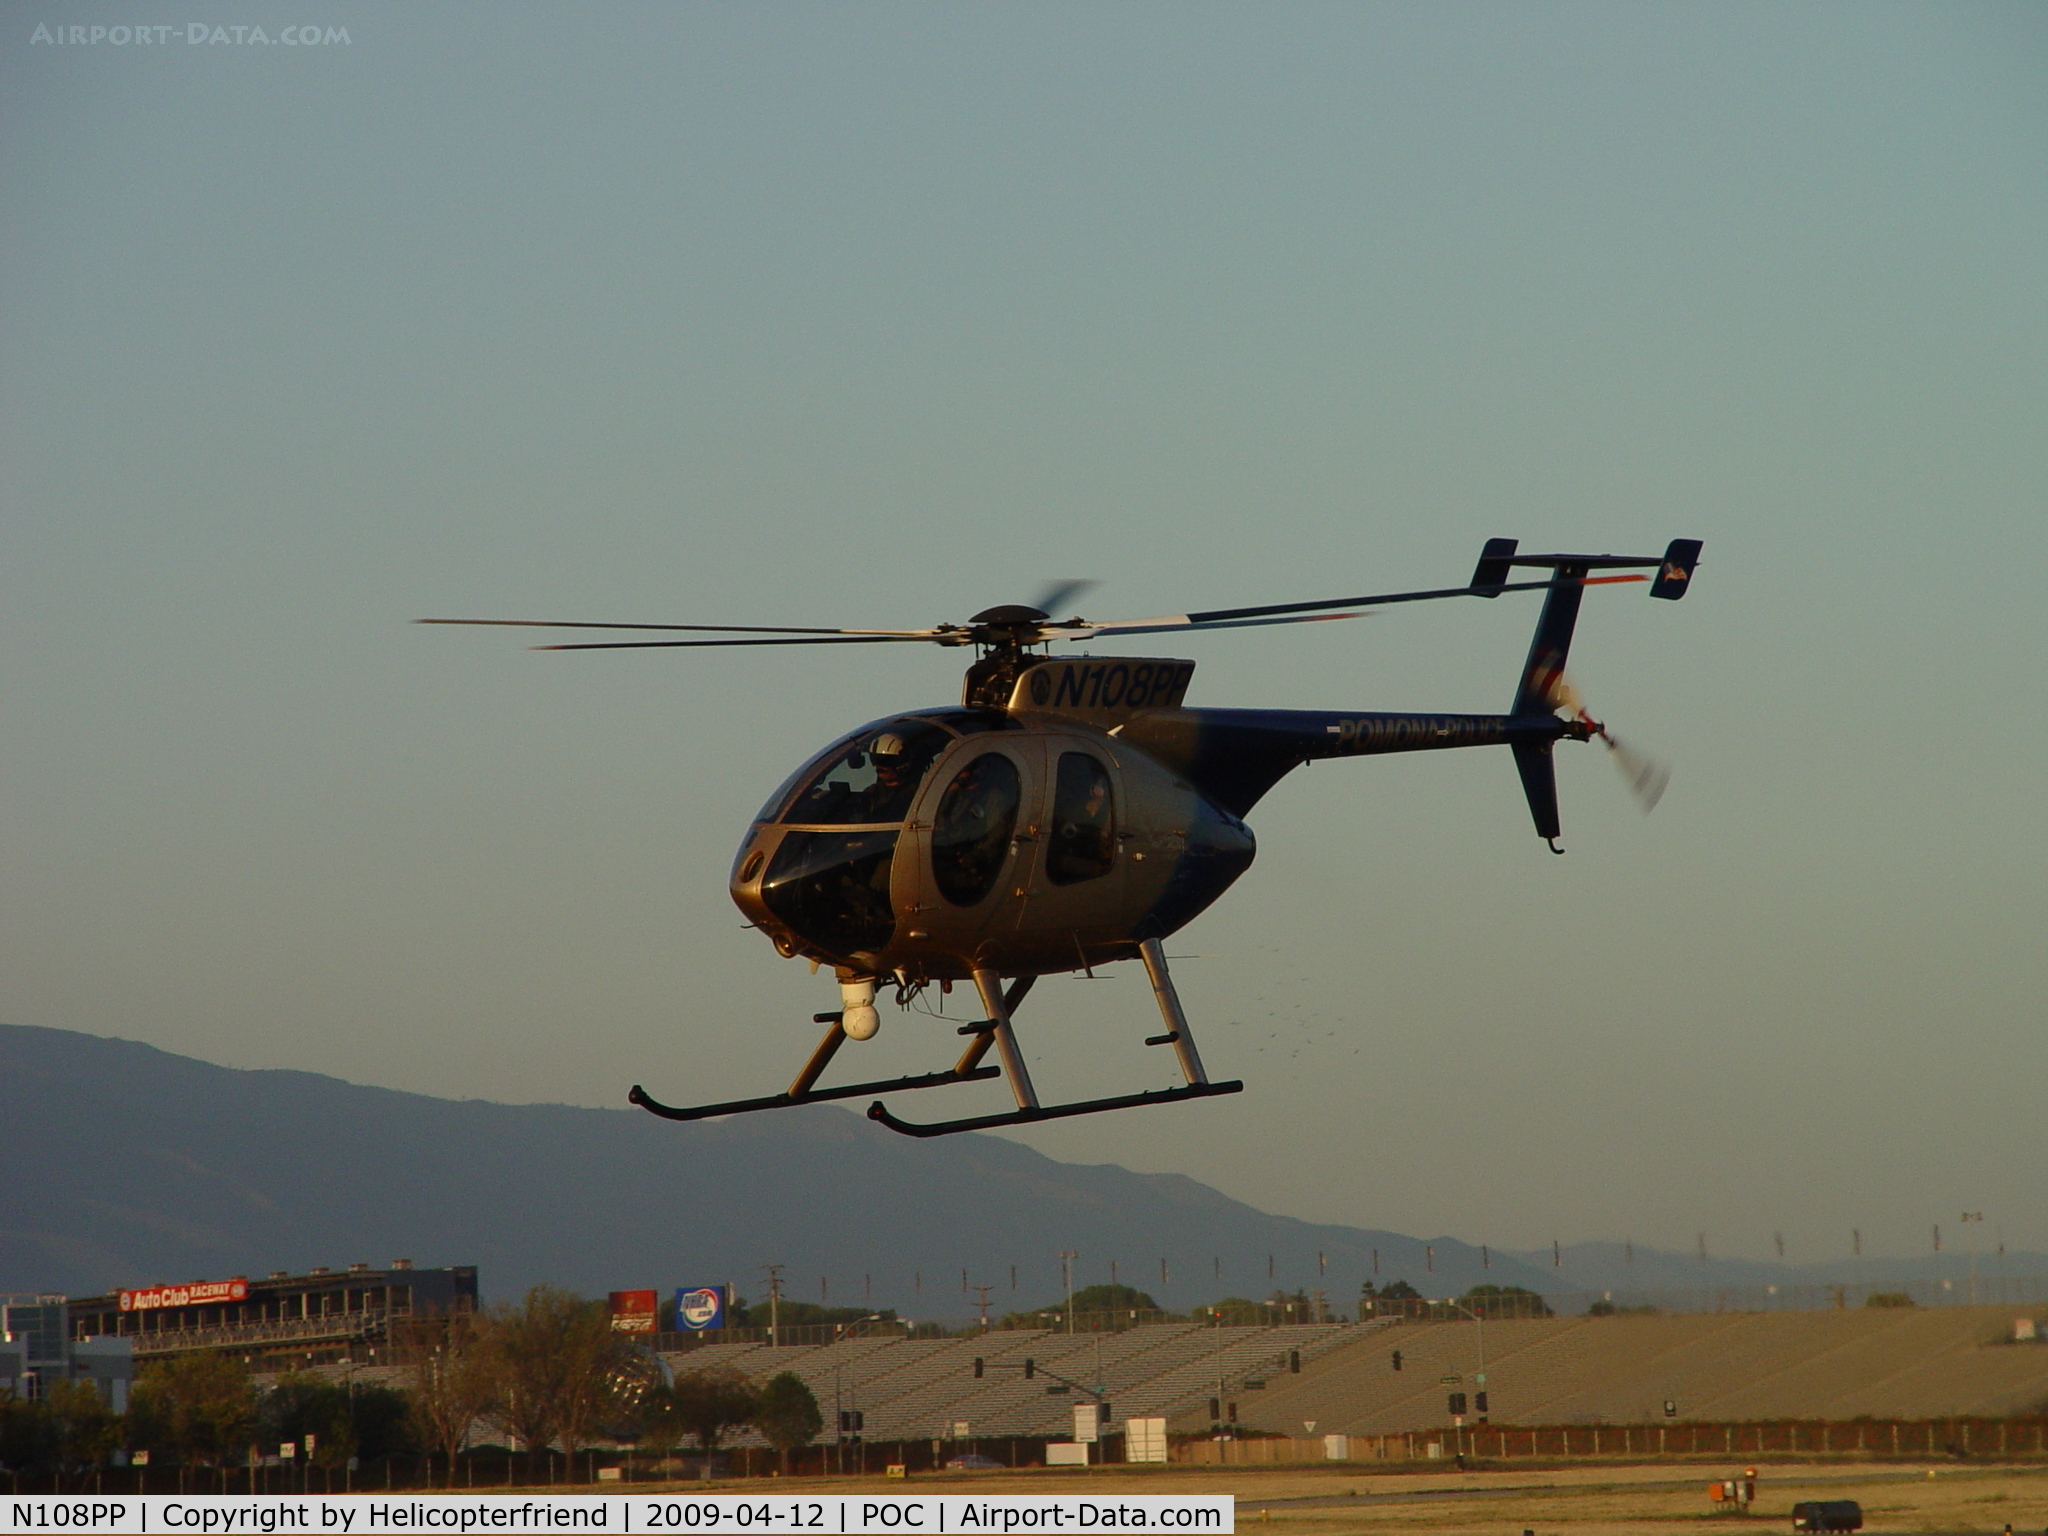 N108PP, 2008 MD Helicopters 369E C/N 0578E, Over south taxiway preparing to depart for patrol